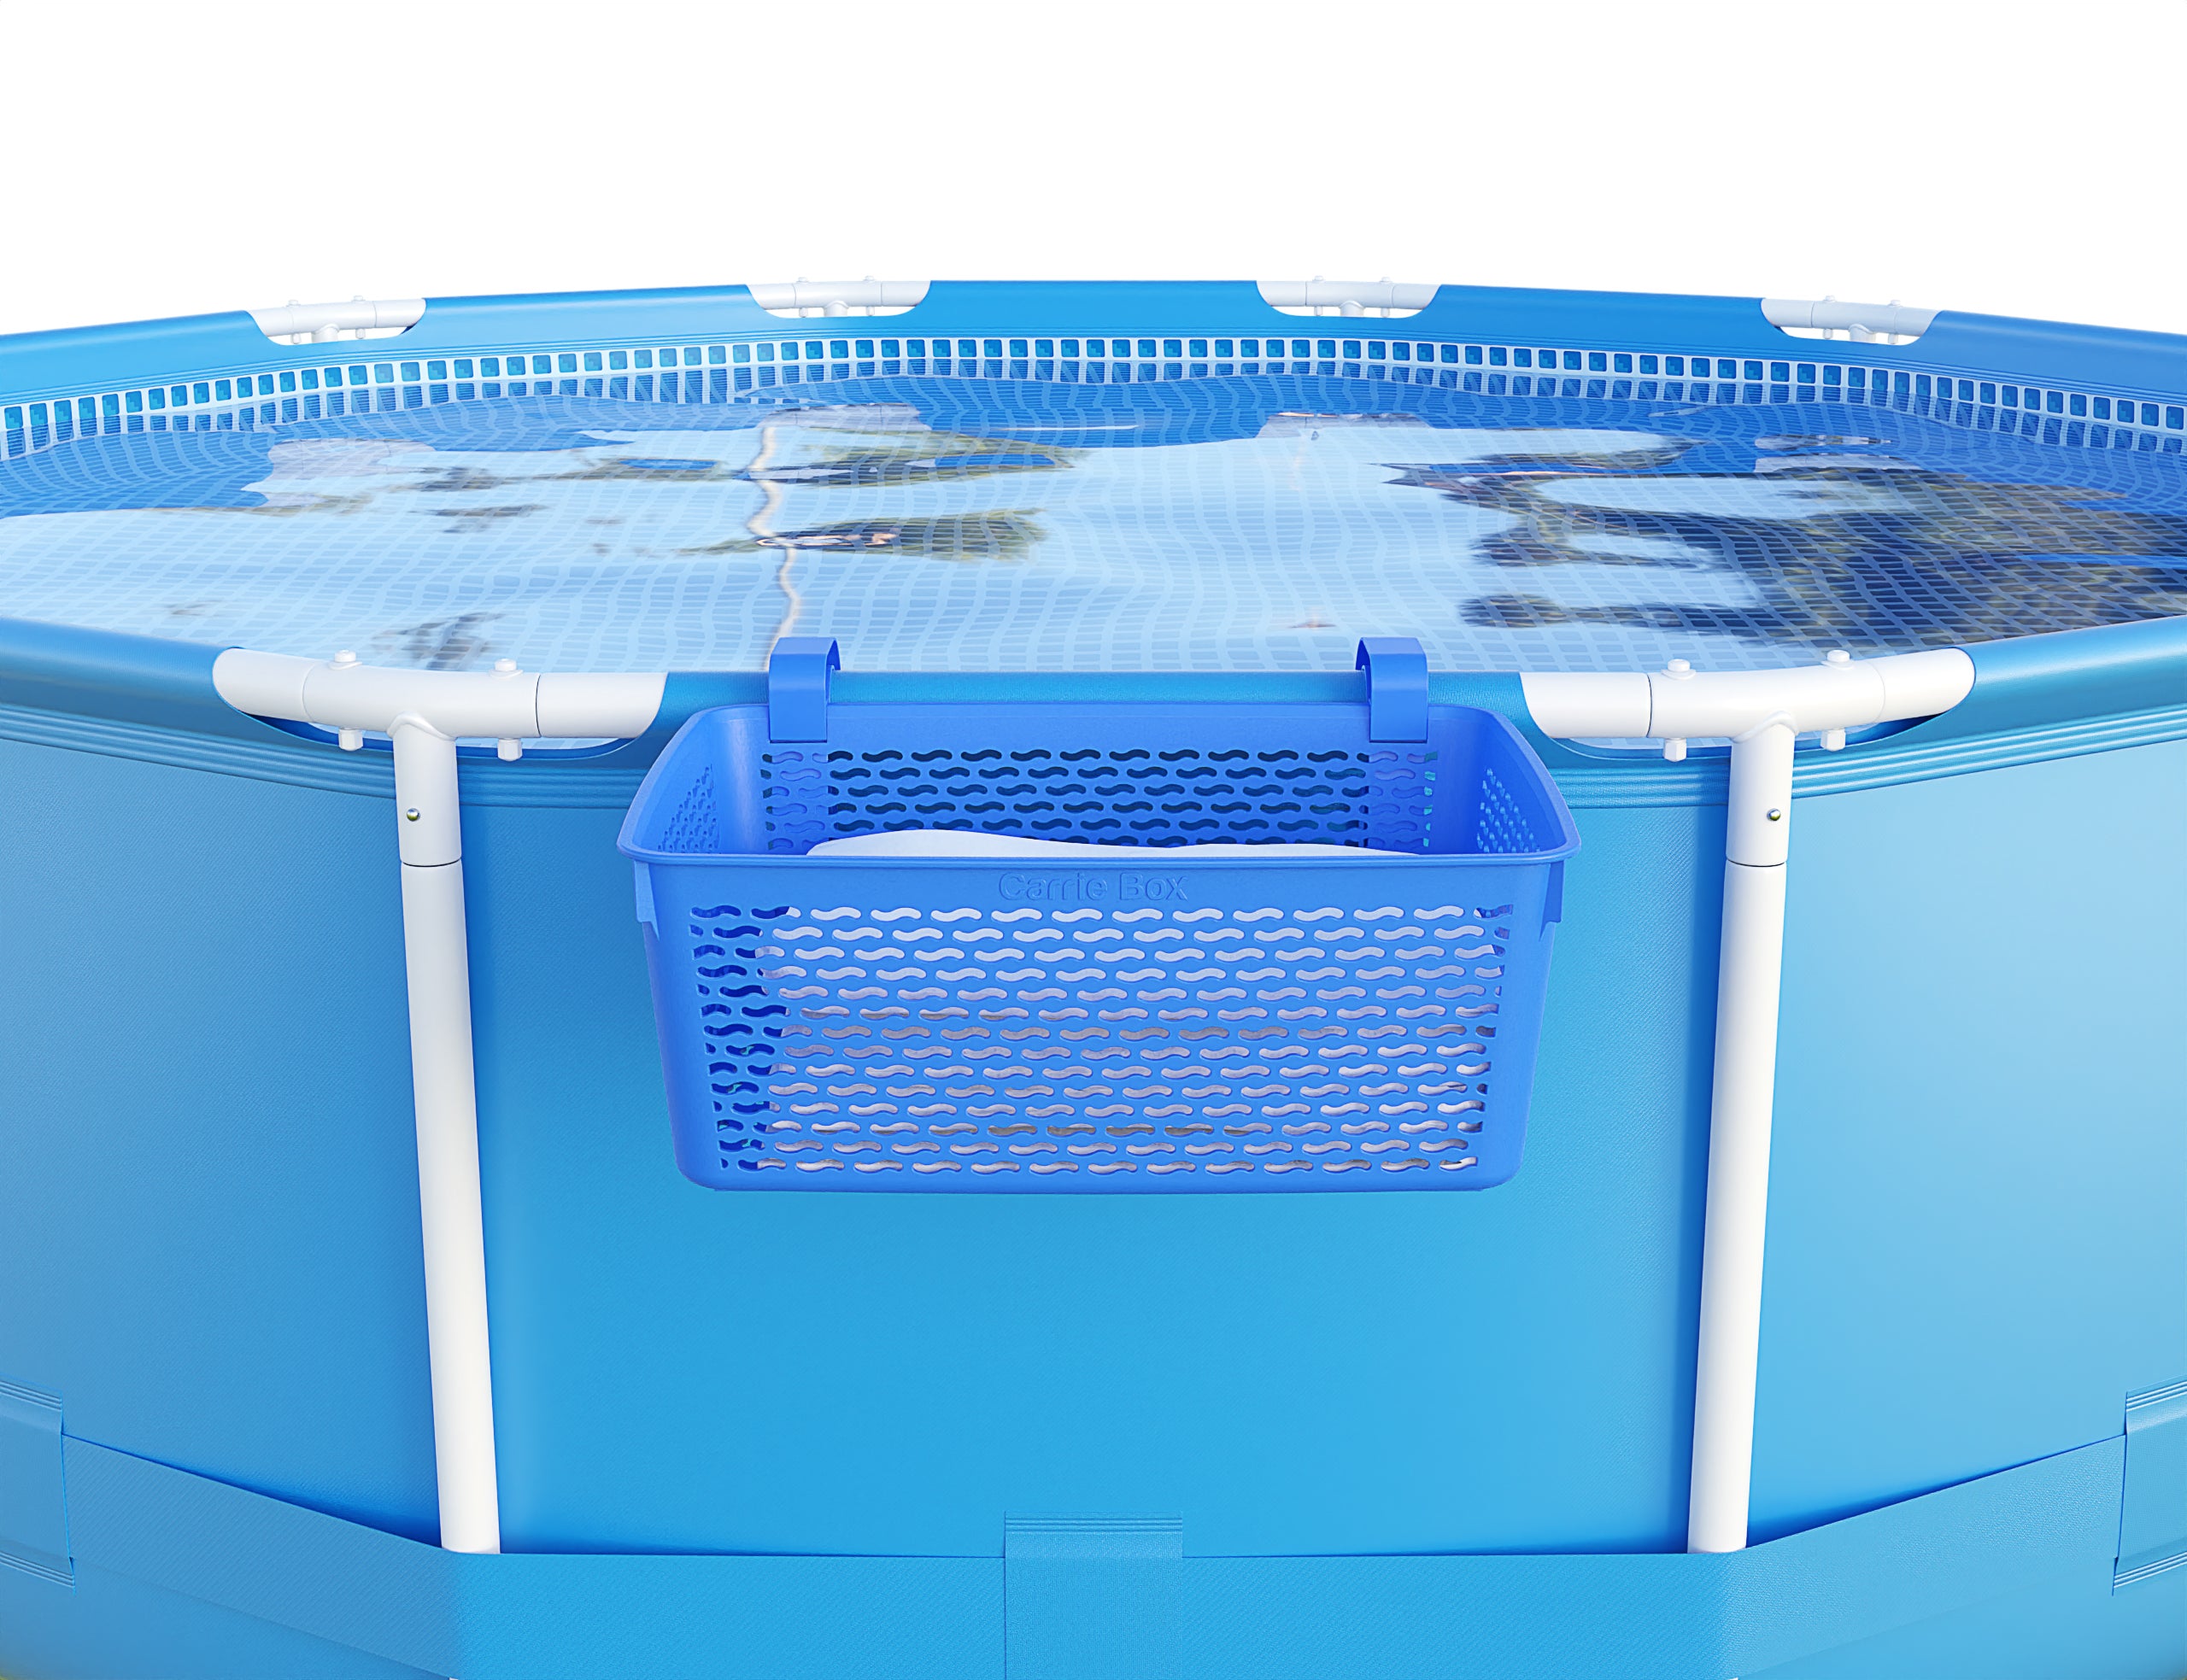 Carrie Box Poolside Storage Basket For Above Ground Pools Made From Recycled Plastic